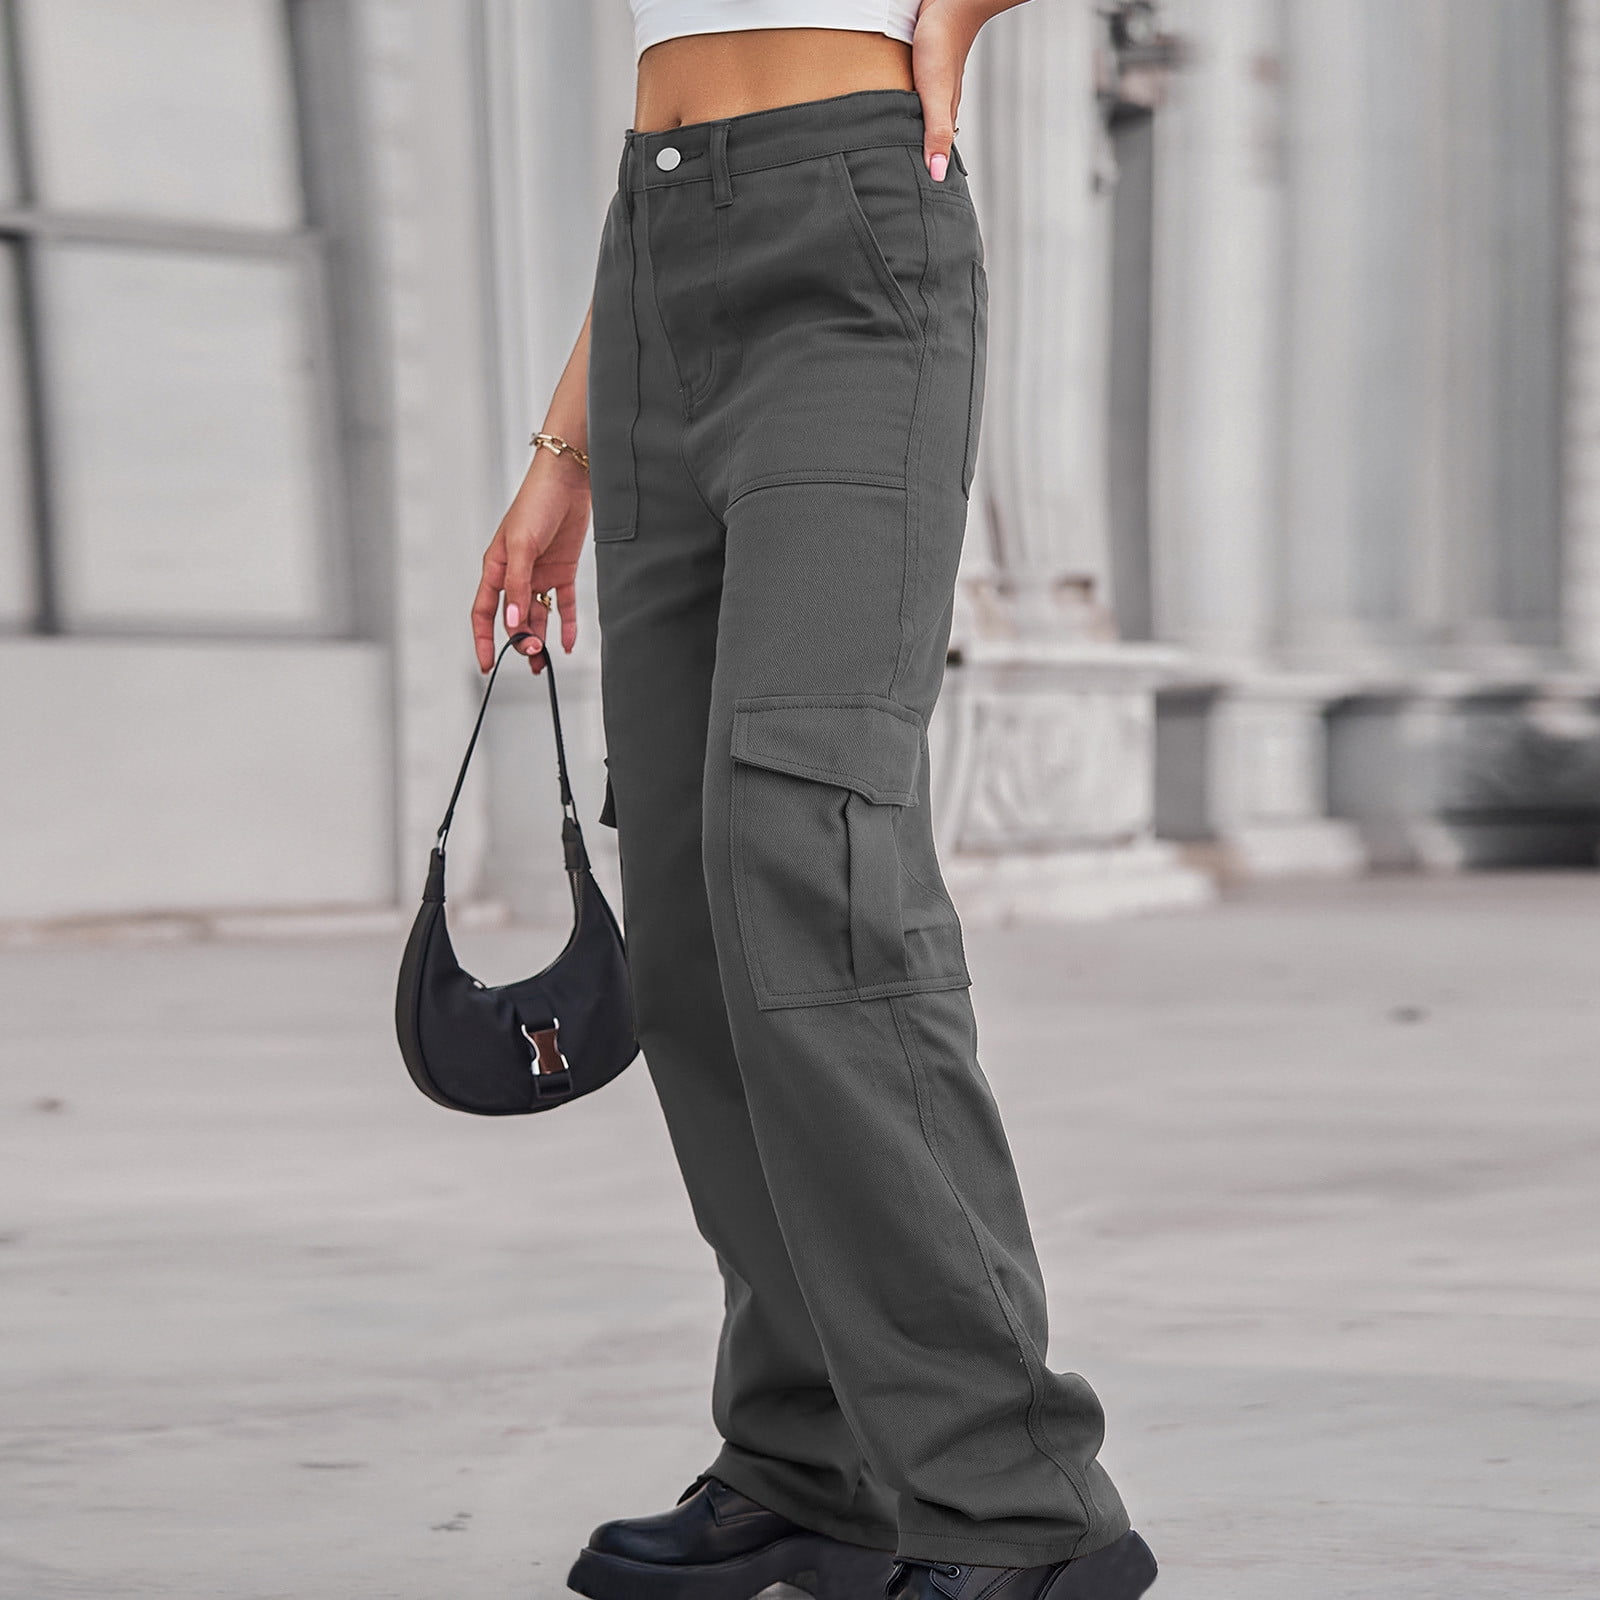 Black Turtleneck with Grey Cargo Pants Outfits (3 ideas & outfits) |  Lookastic